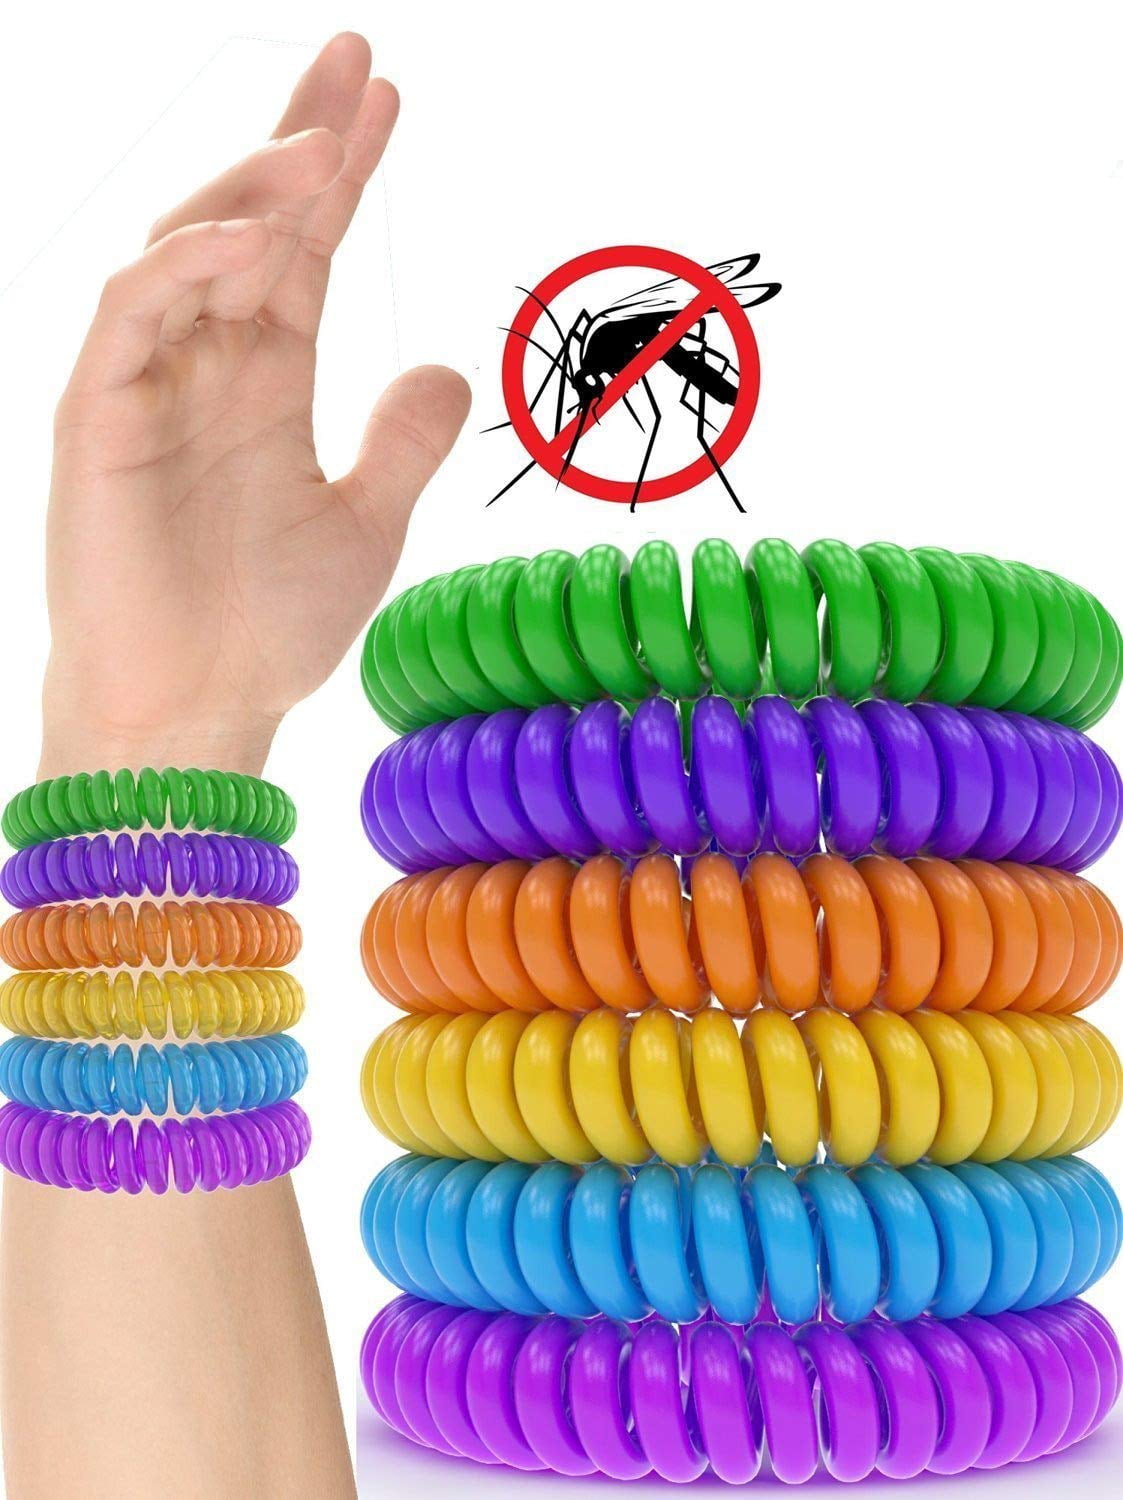 1pcs Anti mosquito insect Bug Repellent Bracelet Wrist Band Camping Outdoor 